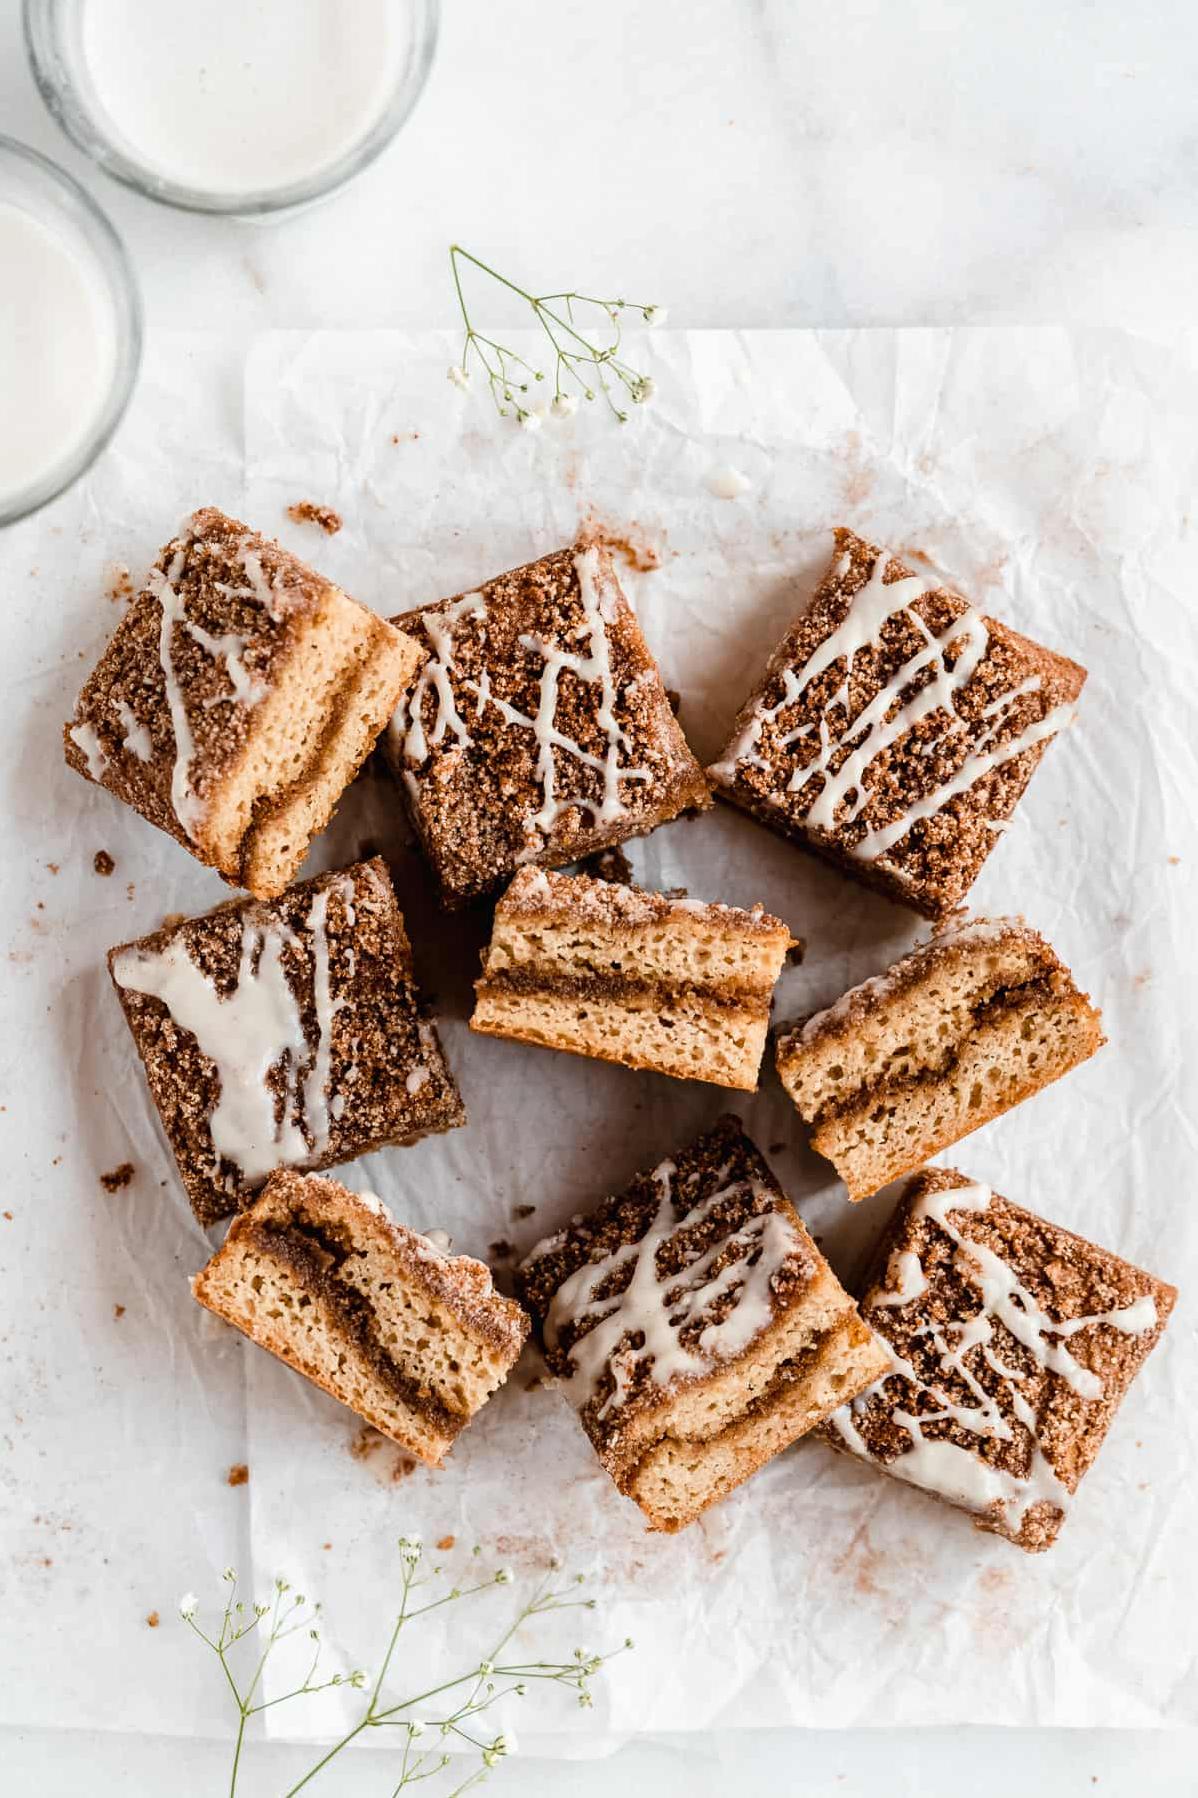  This Paleo coffee cake is gluten-free, grain-free, dairy-free, and refined-sugar-free.